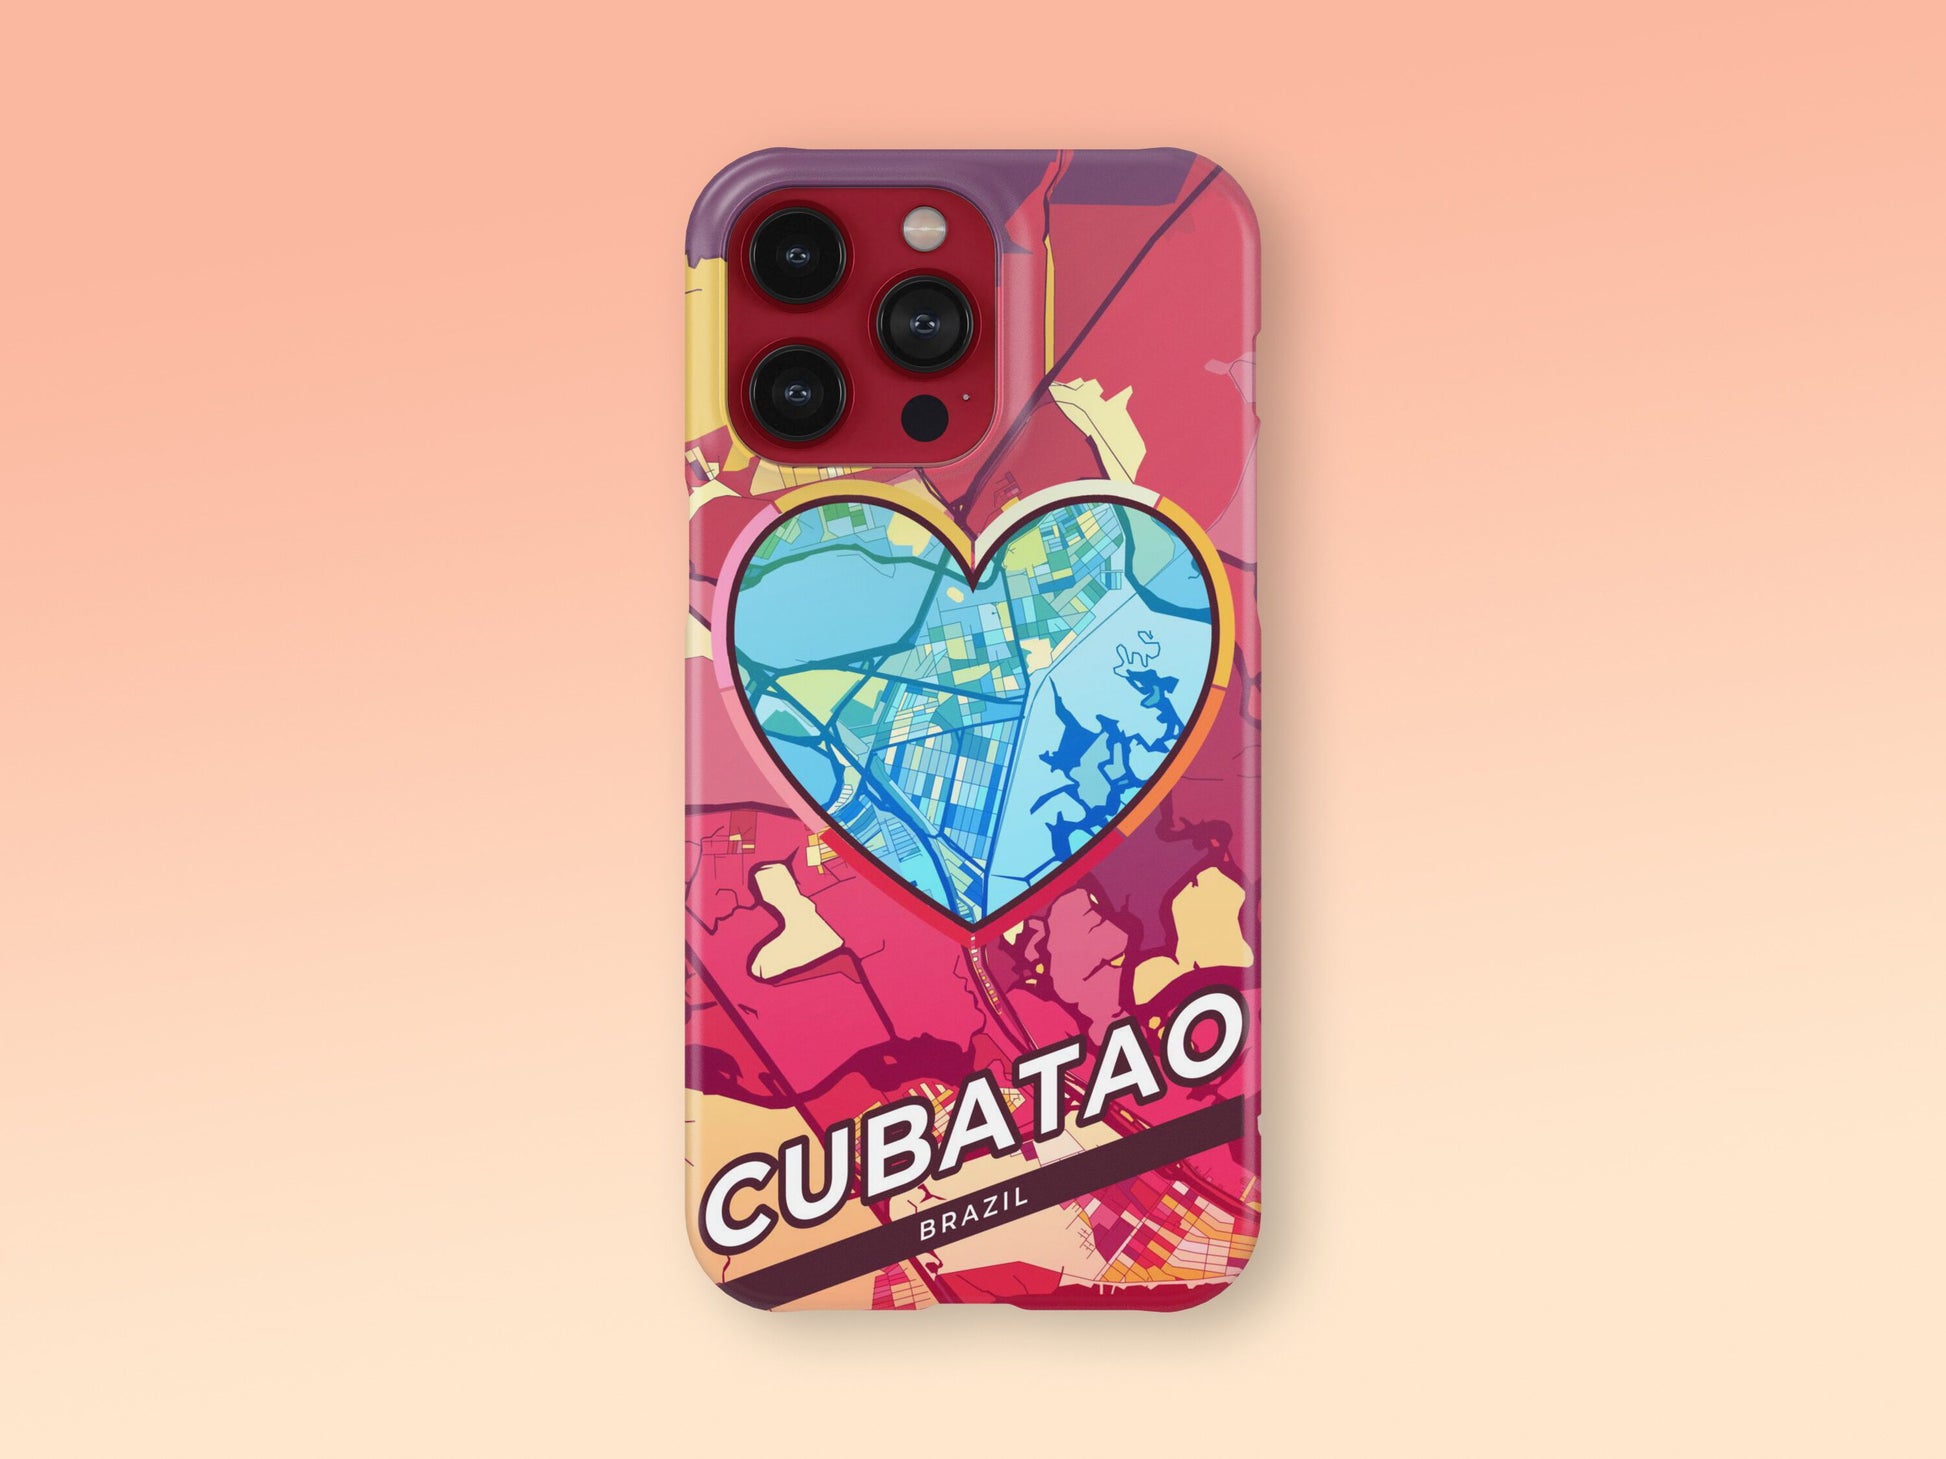 Cubatao Brazil slim phone case with colorful icon. Birthday, wedding or housewarming gift. Couple match cases. 2